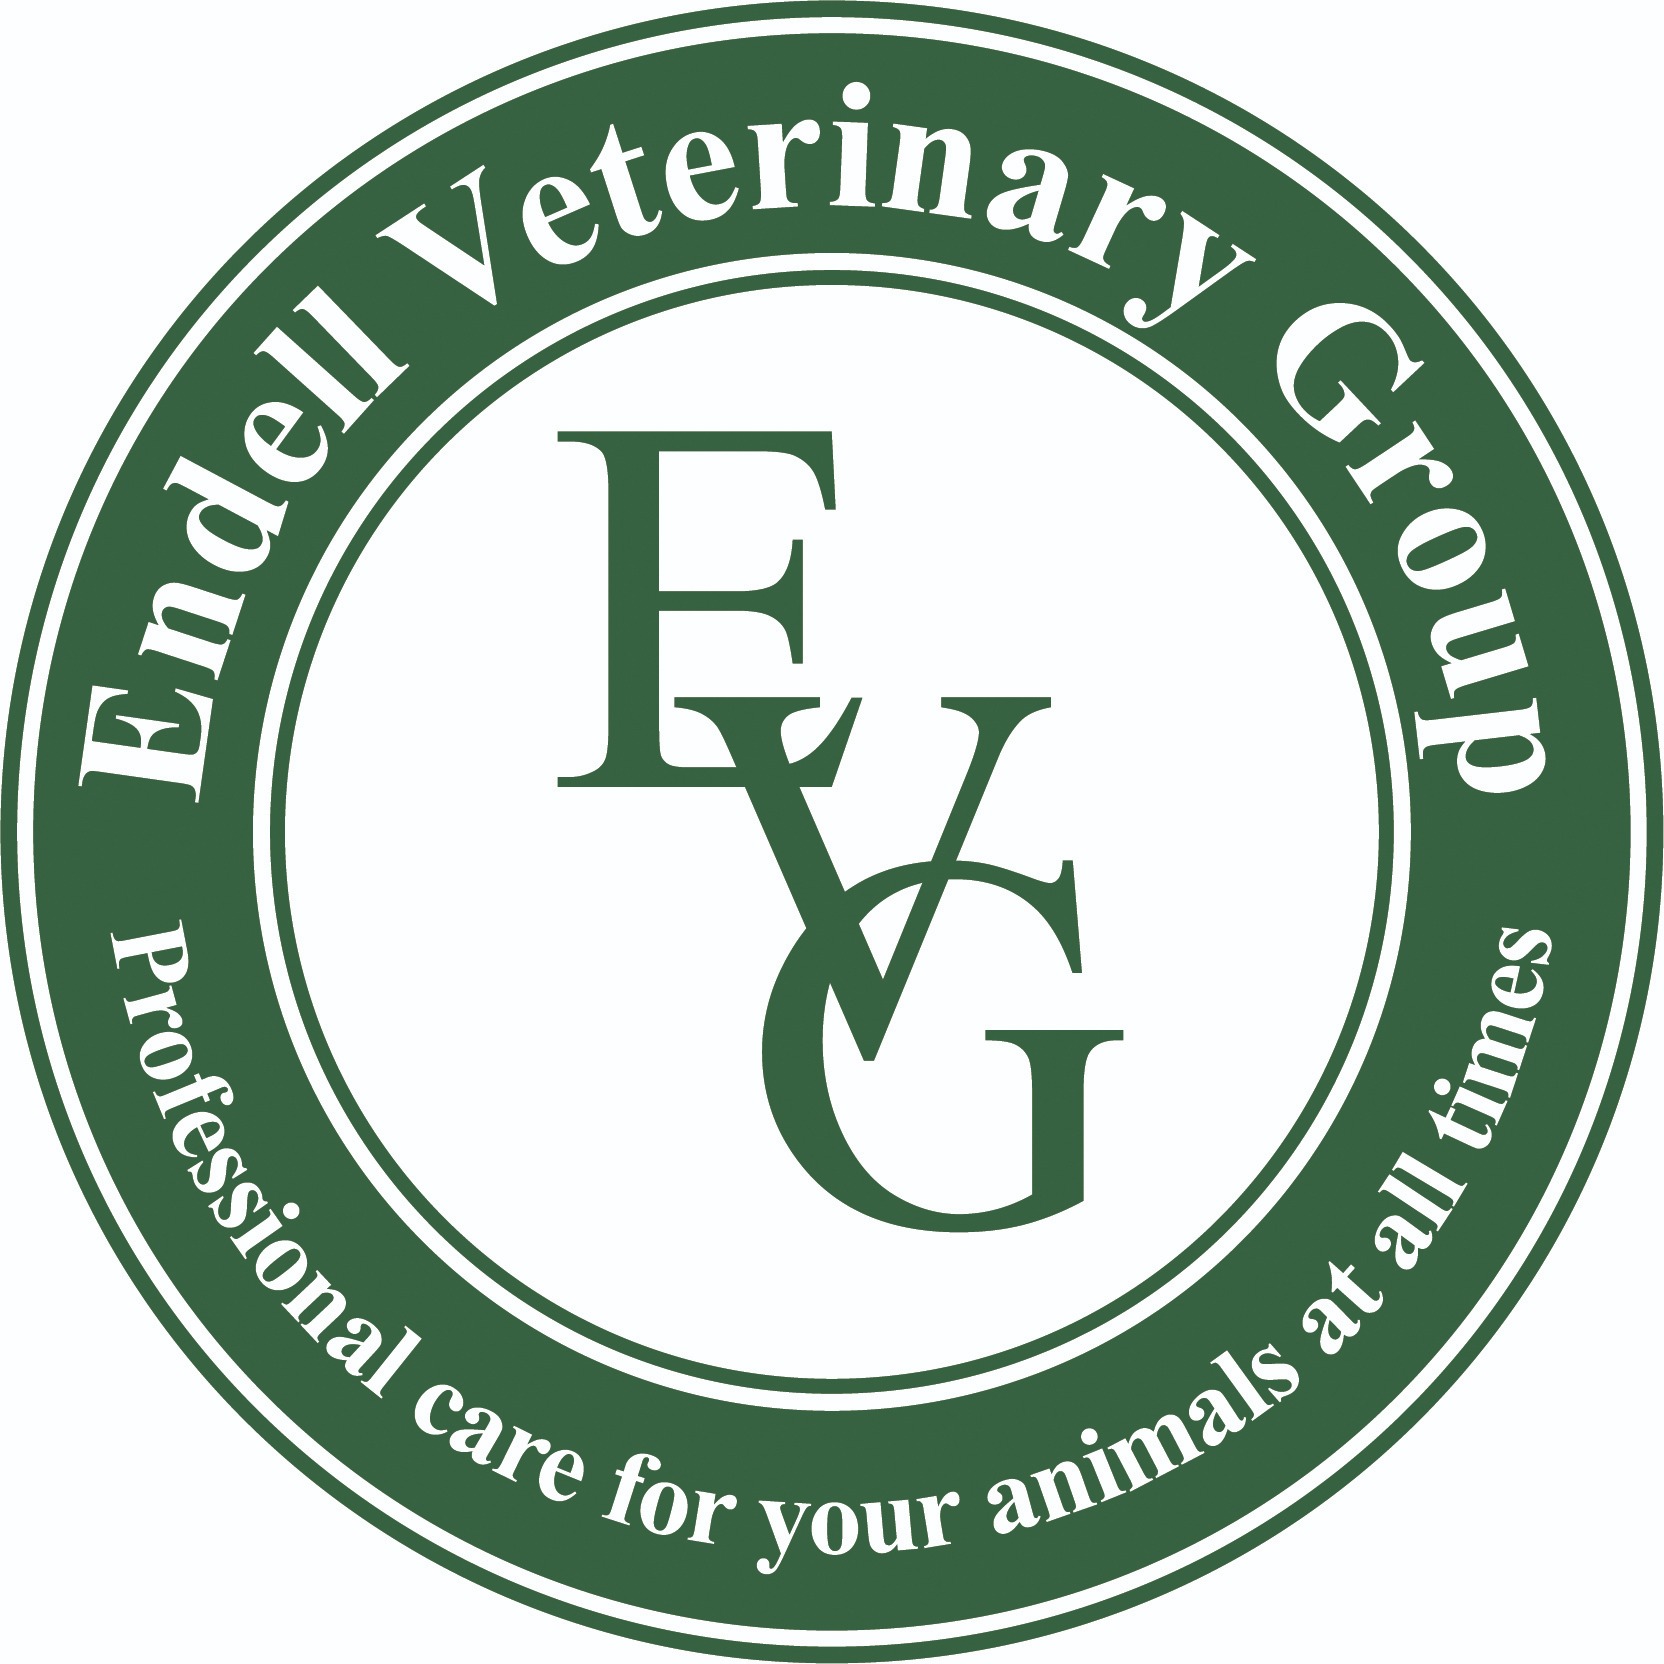 Endell Veterinary Group - Salisbury, Wiltshire SP1 3UH - 01722 333291 | ShowMeLocal.com